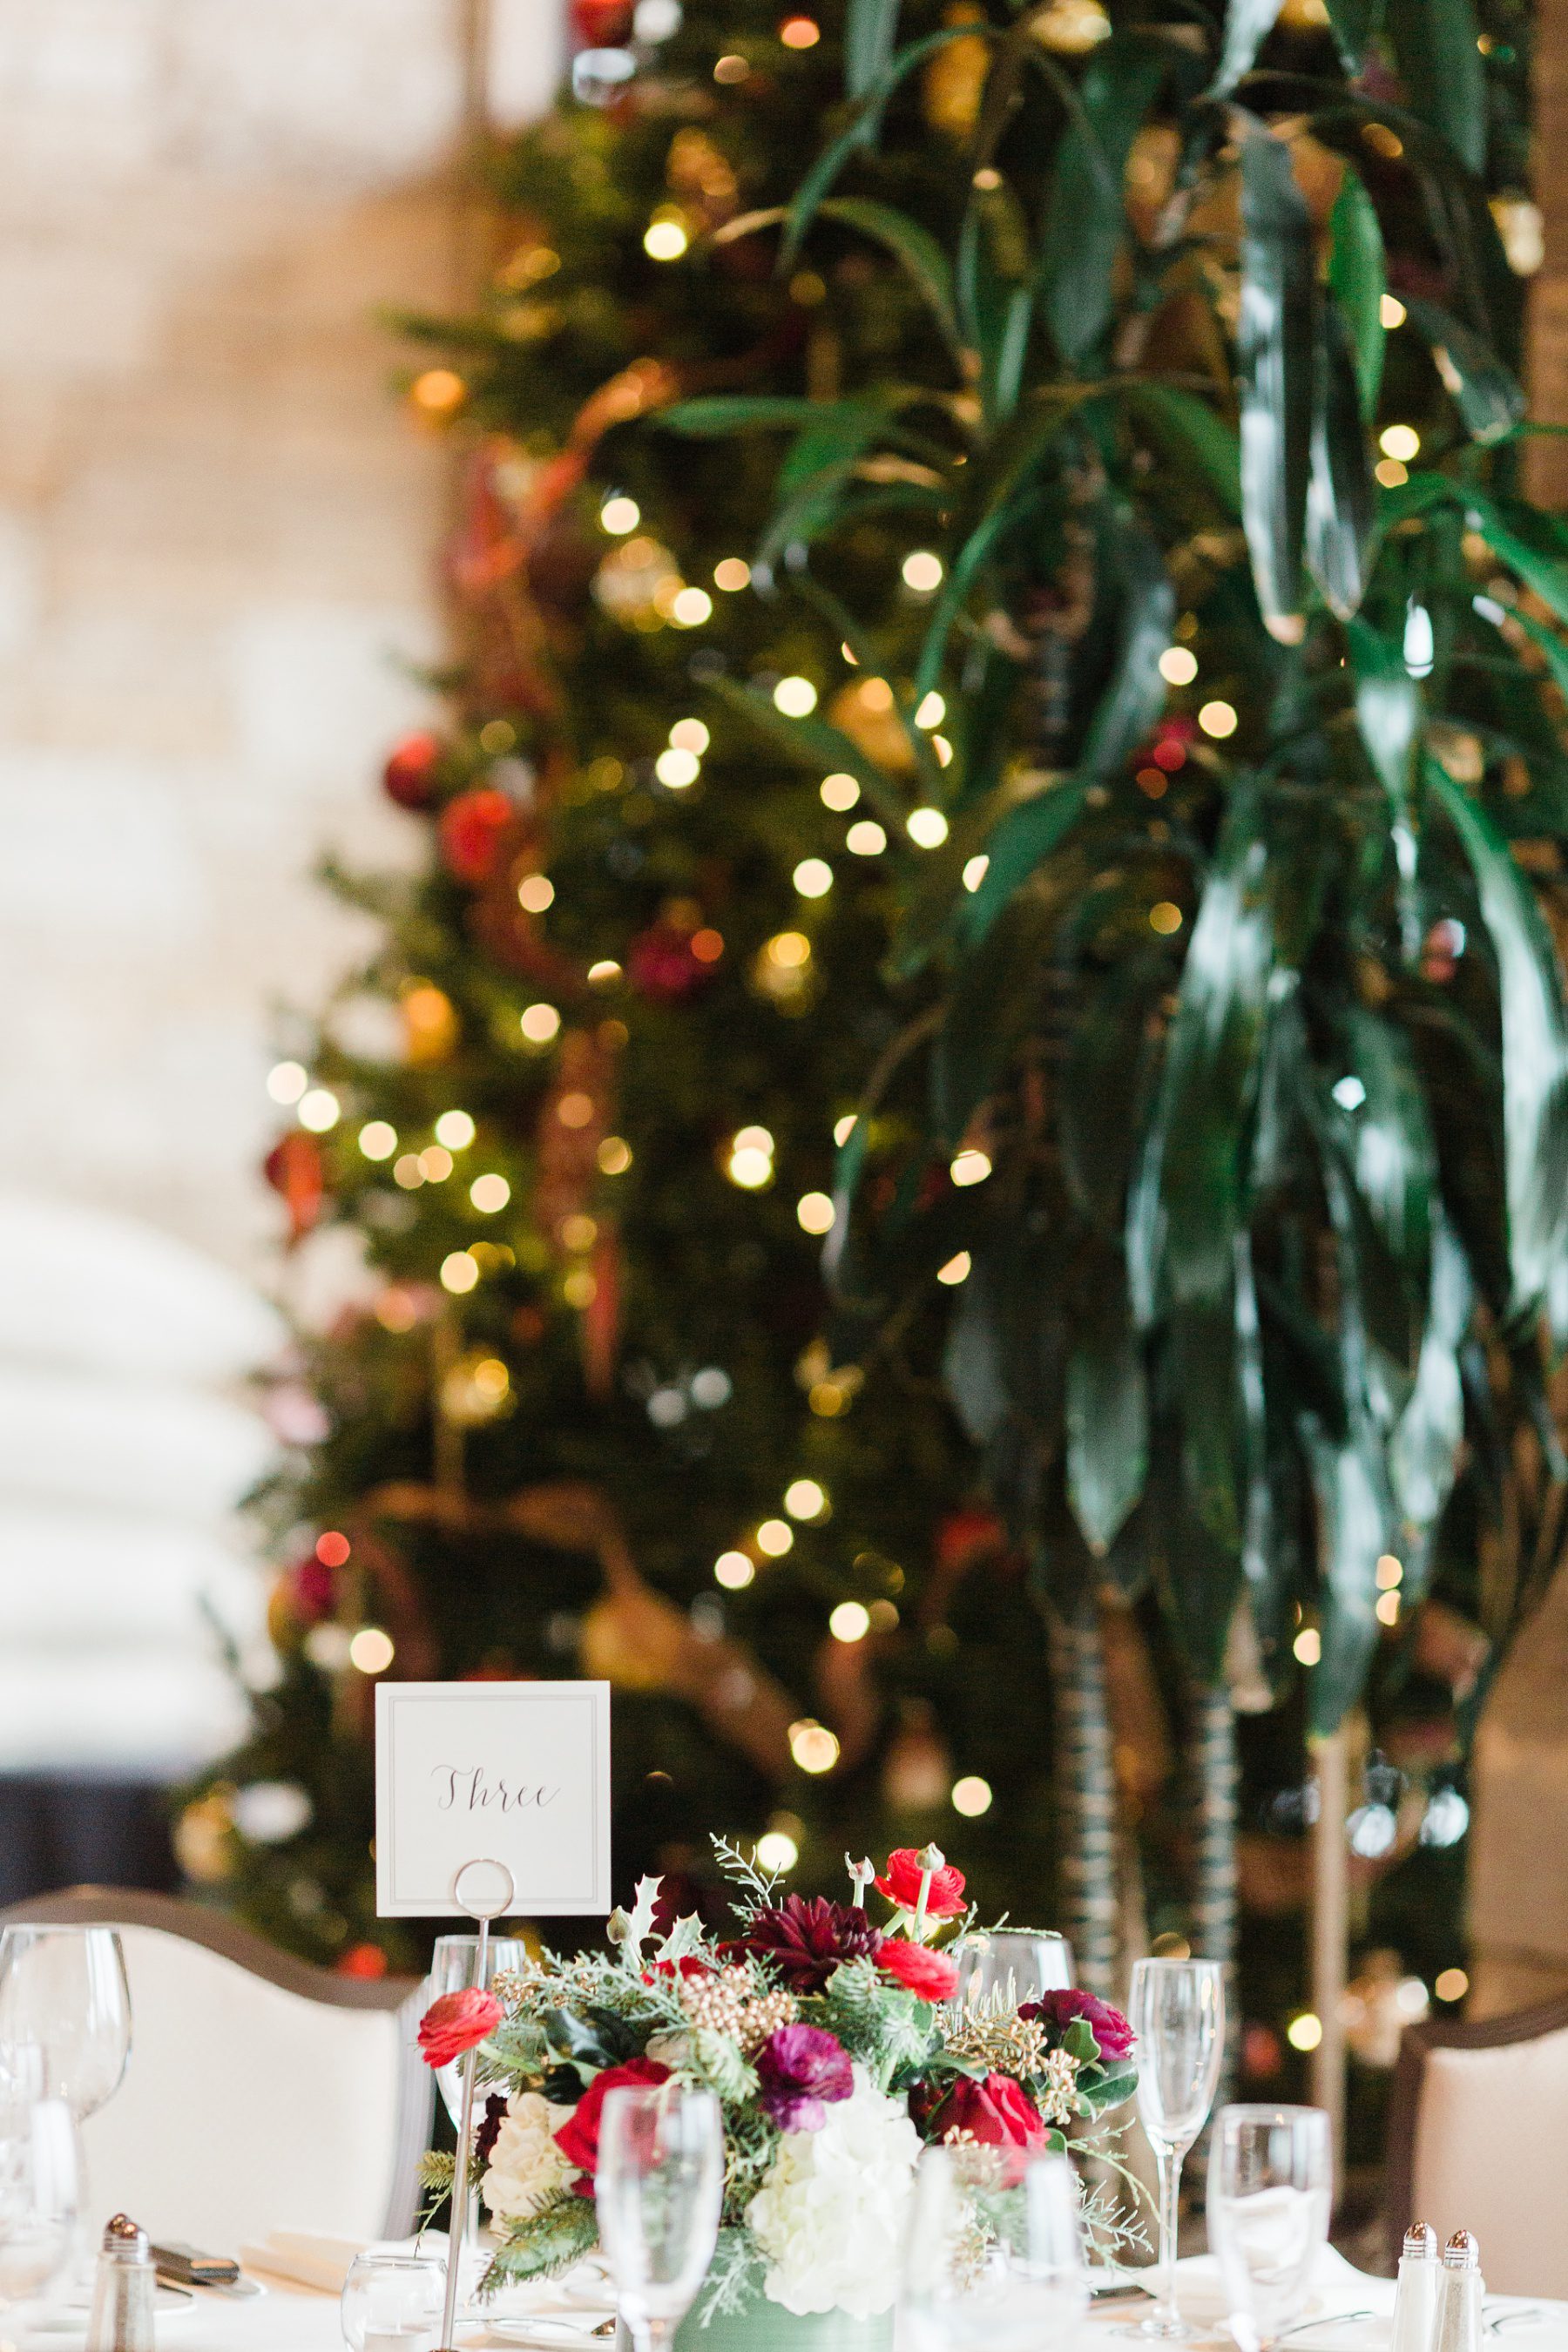 Floral centerpiece next to Christmas tree